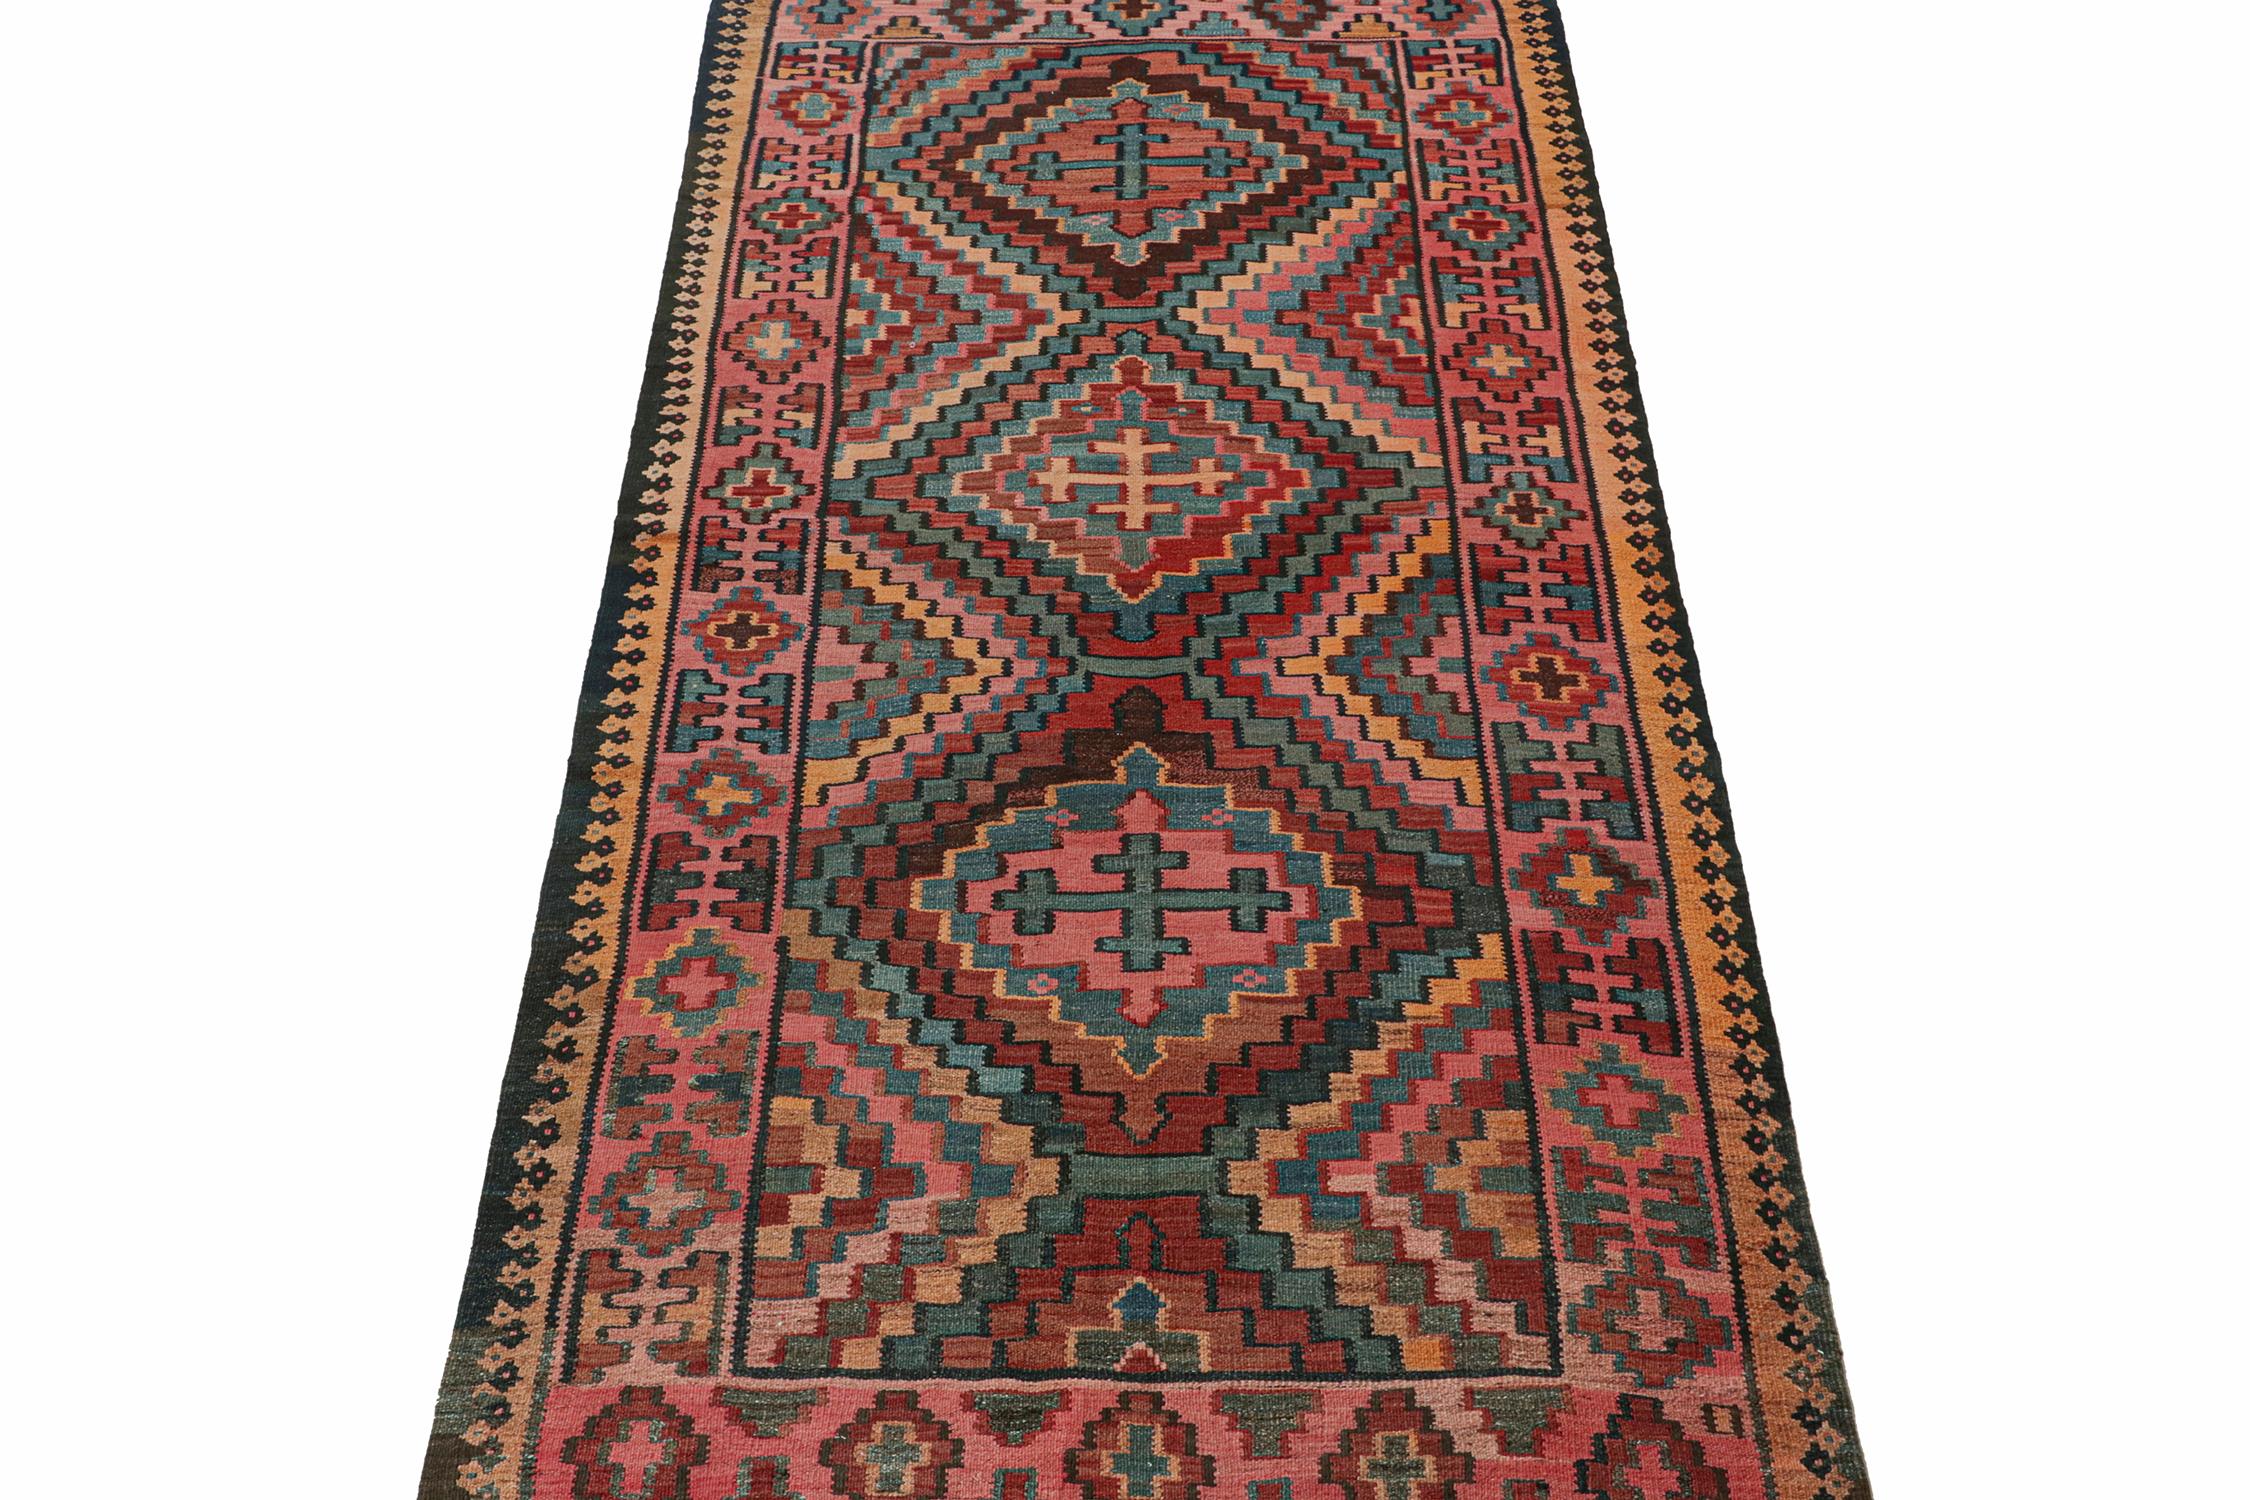 This vintage 5x11 Persian Kilim is an outstanding new addition of Bidjar provenance in Rug & Kilim's rare tribal curations. Handwoven in wool circa 1950-1960.

Further on the Design: 

Bidjar Kilims like this are reputed for their durability and